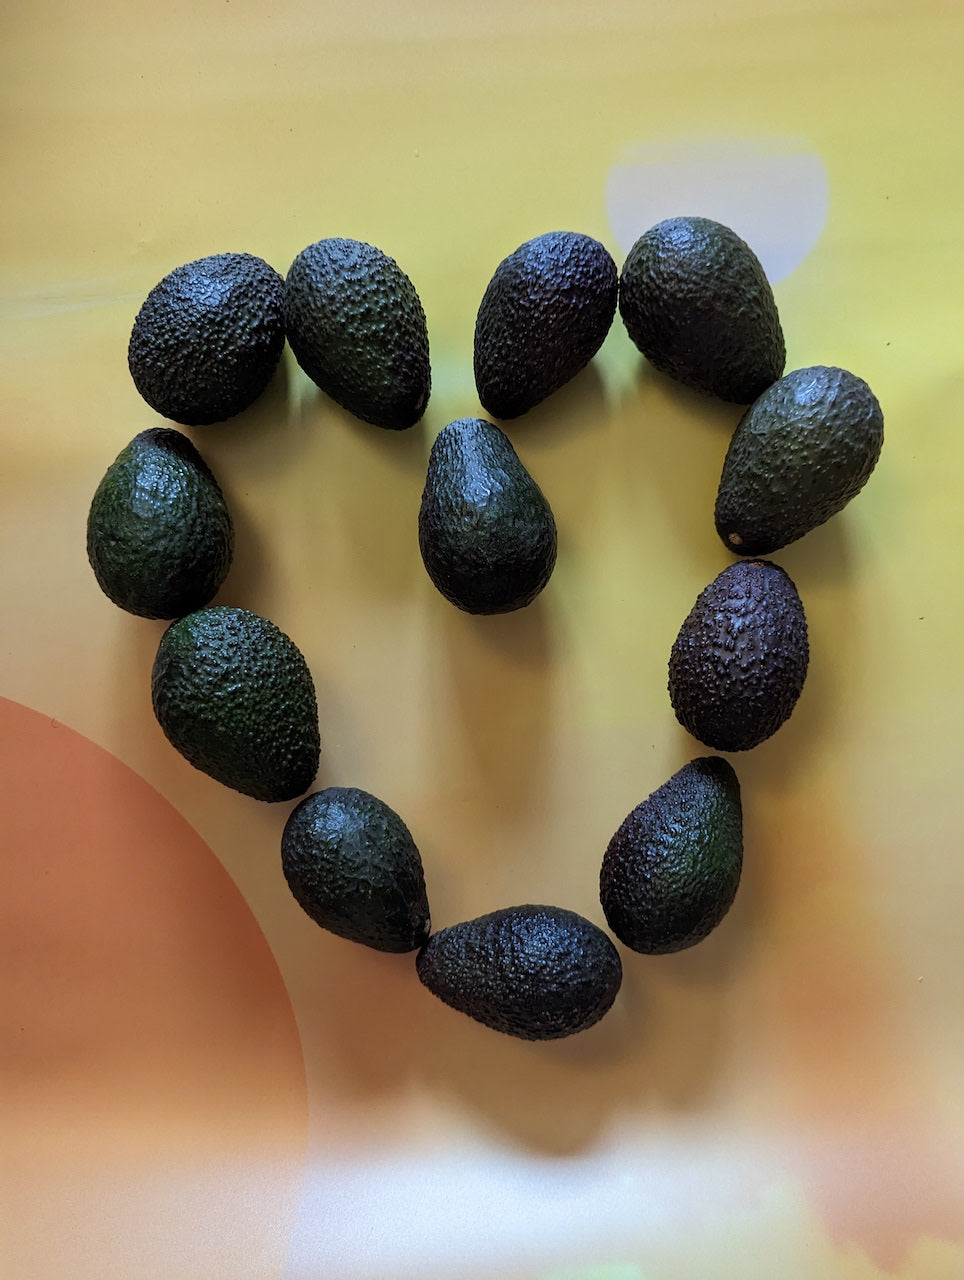 California Grown Avocados Delivered To Your Door - Certified Organic Hass Avocado Boxes